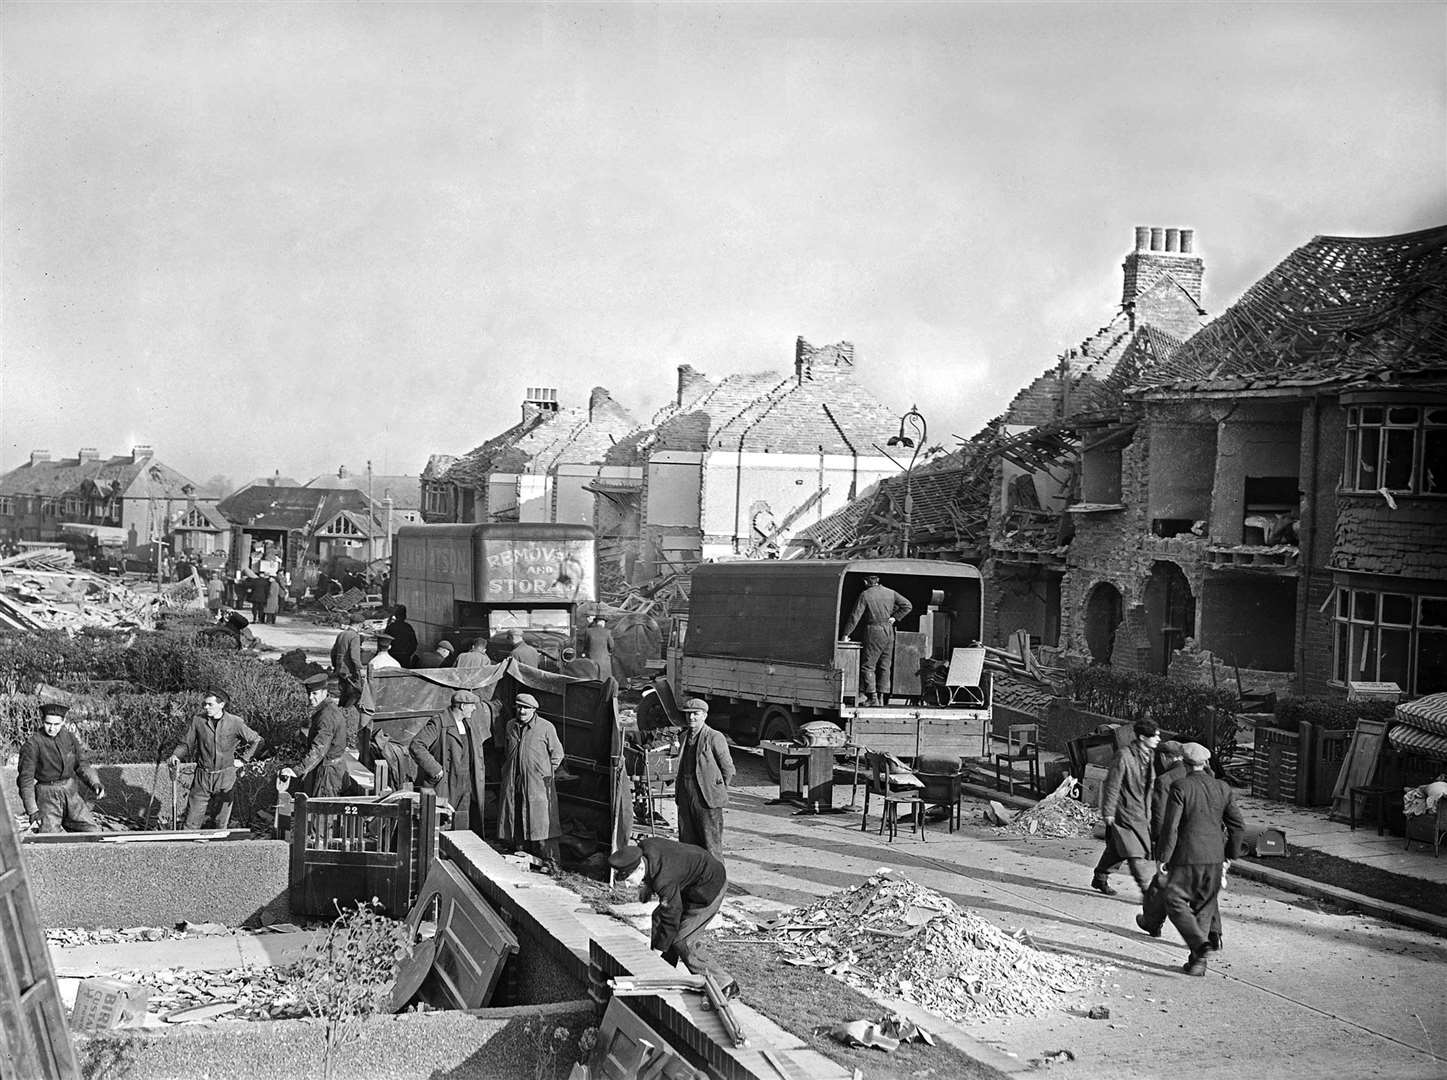 KMG USE ONLY COPYRIGHT: Kent Photo Archive War and Peace Collection SUBMITTED BY: Roger Smoothy 01622 765594Slug; GRAFTON MMCaption: Devastation after the Grafton Avenue V1.Copyright: Kent Photo Archive War and Peace Collection Roger Smoothy01622 765594Category: Heritage and History.V1 Flying bomb damage Grafton Ave. Rochester November 11th 1944. FM2528691 (10434947)